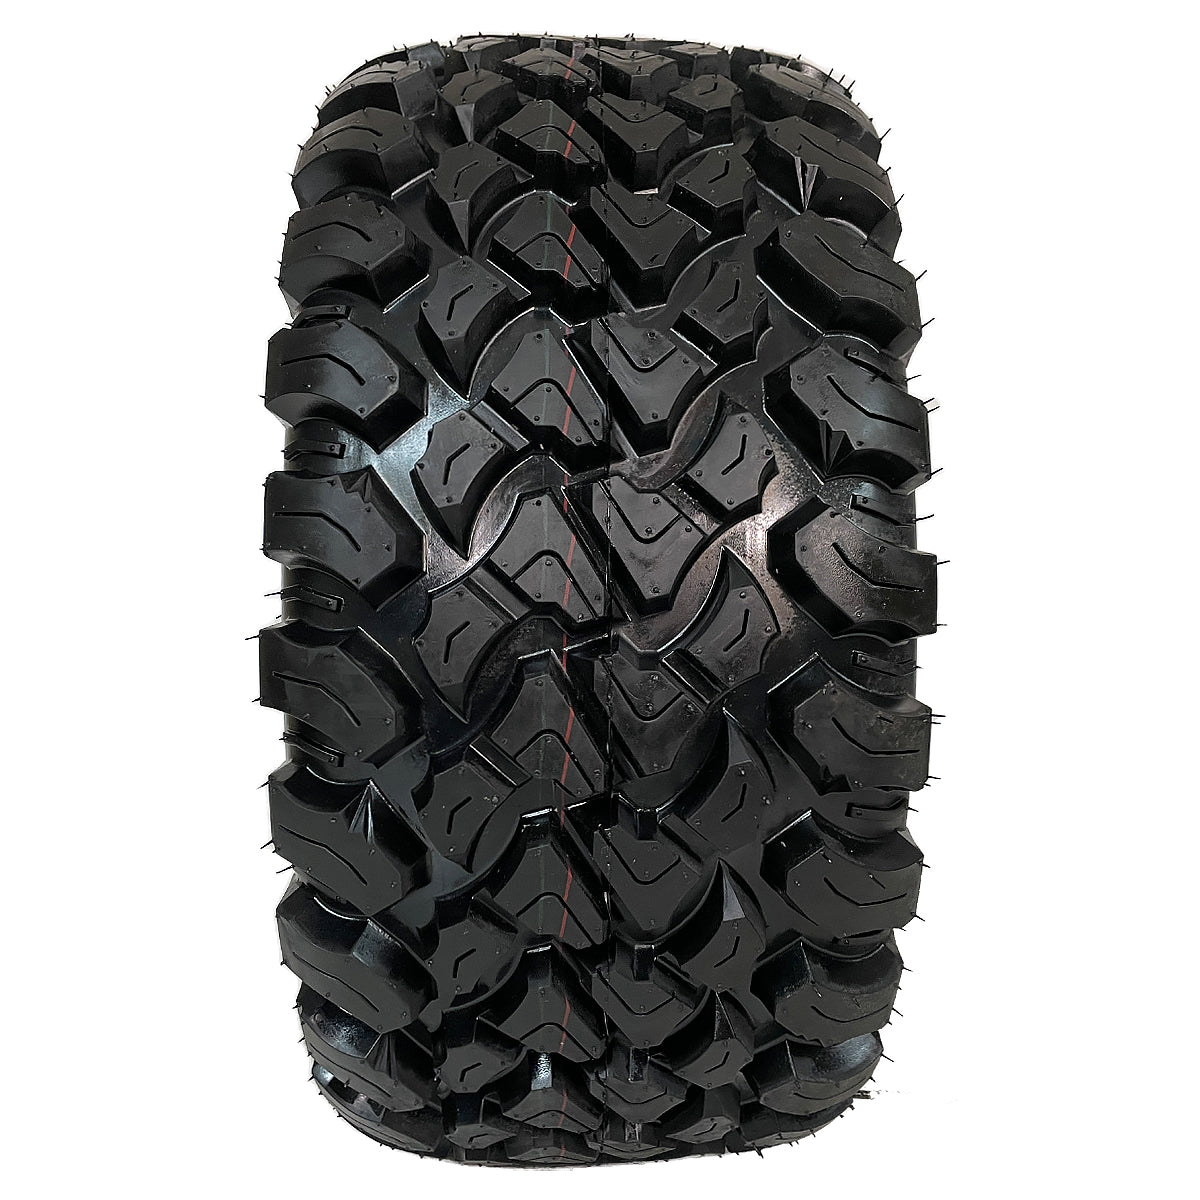 GTW Nomad Off-Road Tire